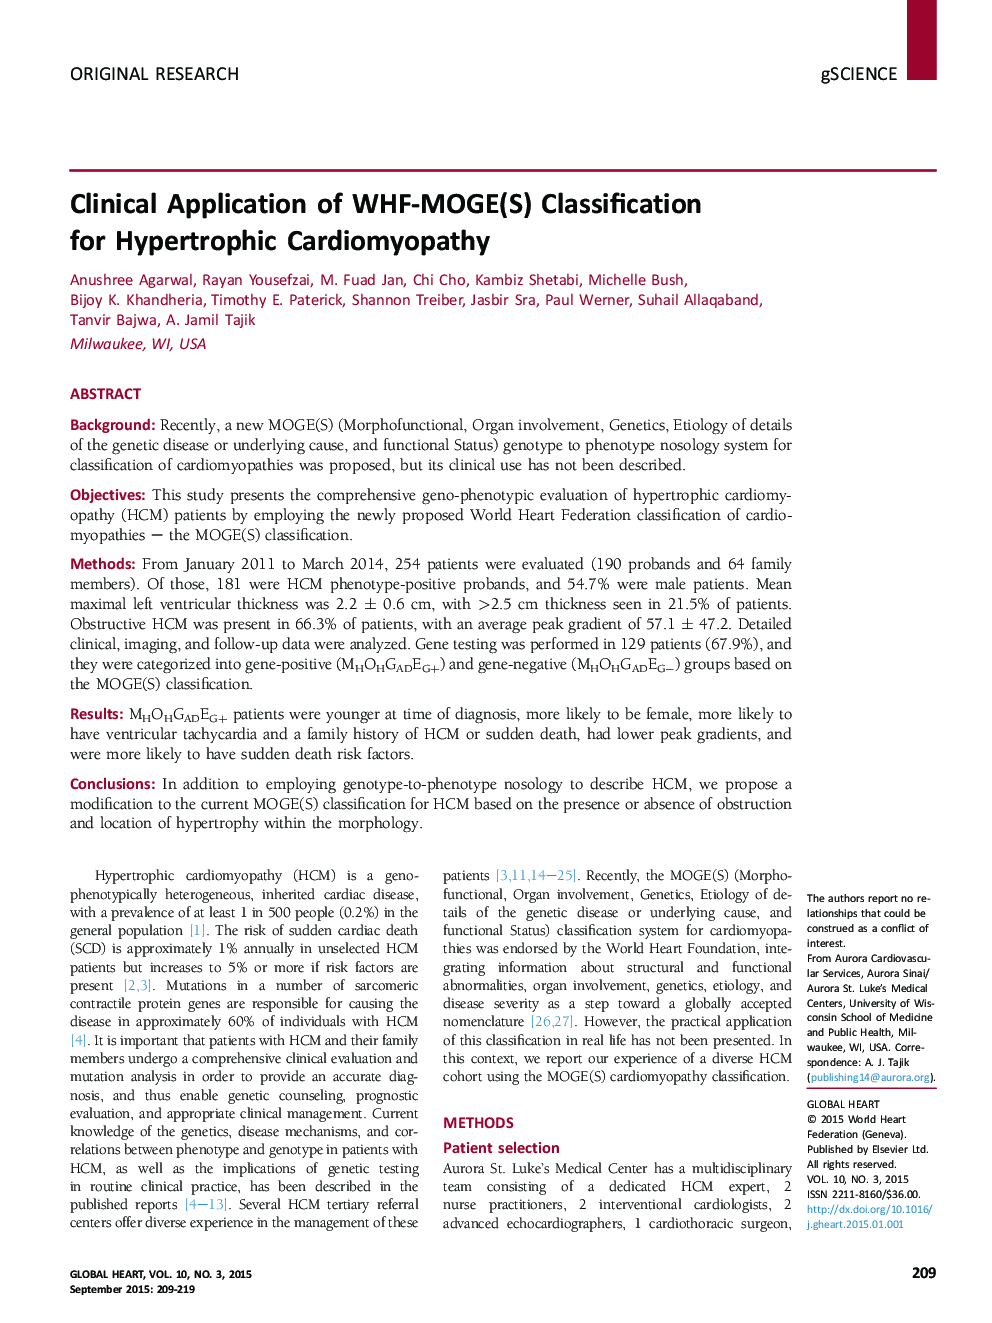 Clinical Application of WHF-MOGE(S) Classification for Hypertrophic Cardiomyopathy 